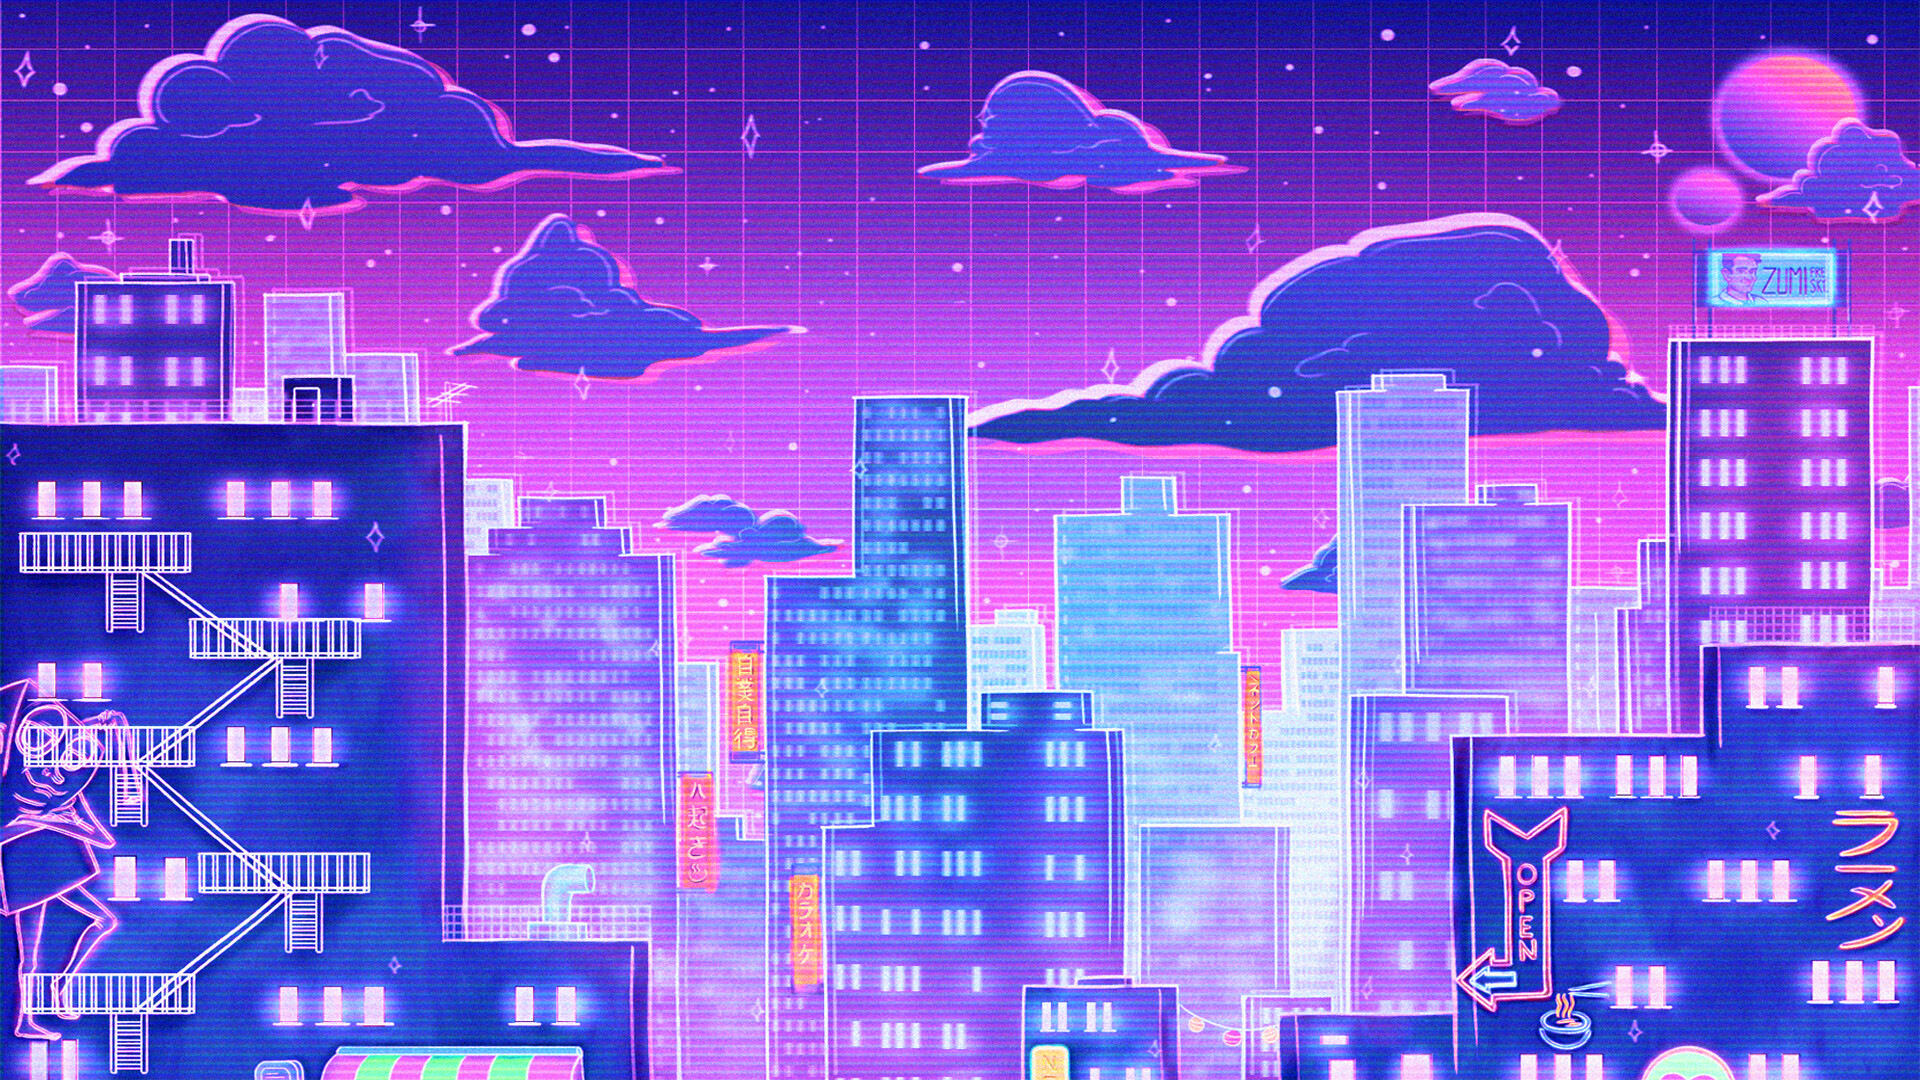 Purple City Background Images HD Pictures and Wallpaper For Free Download   Pngtree